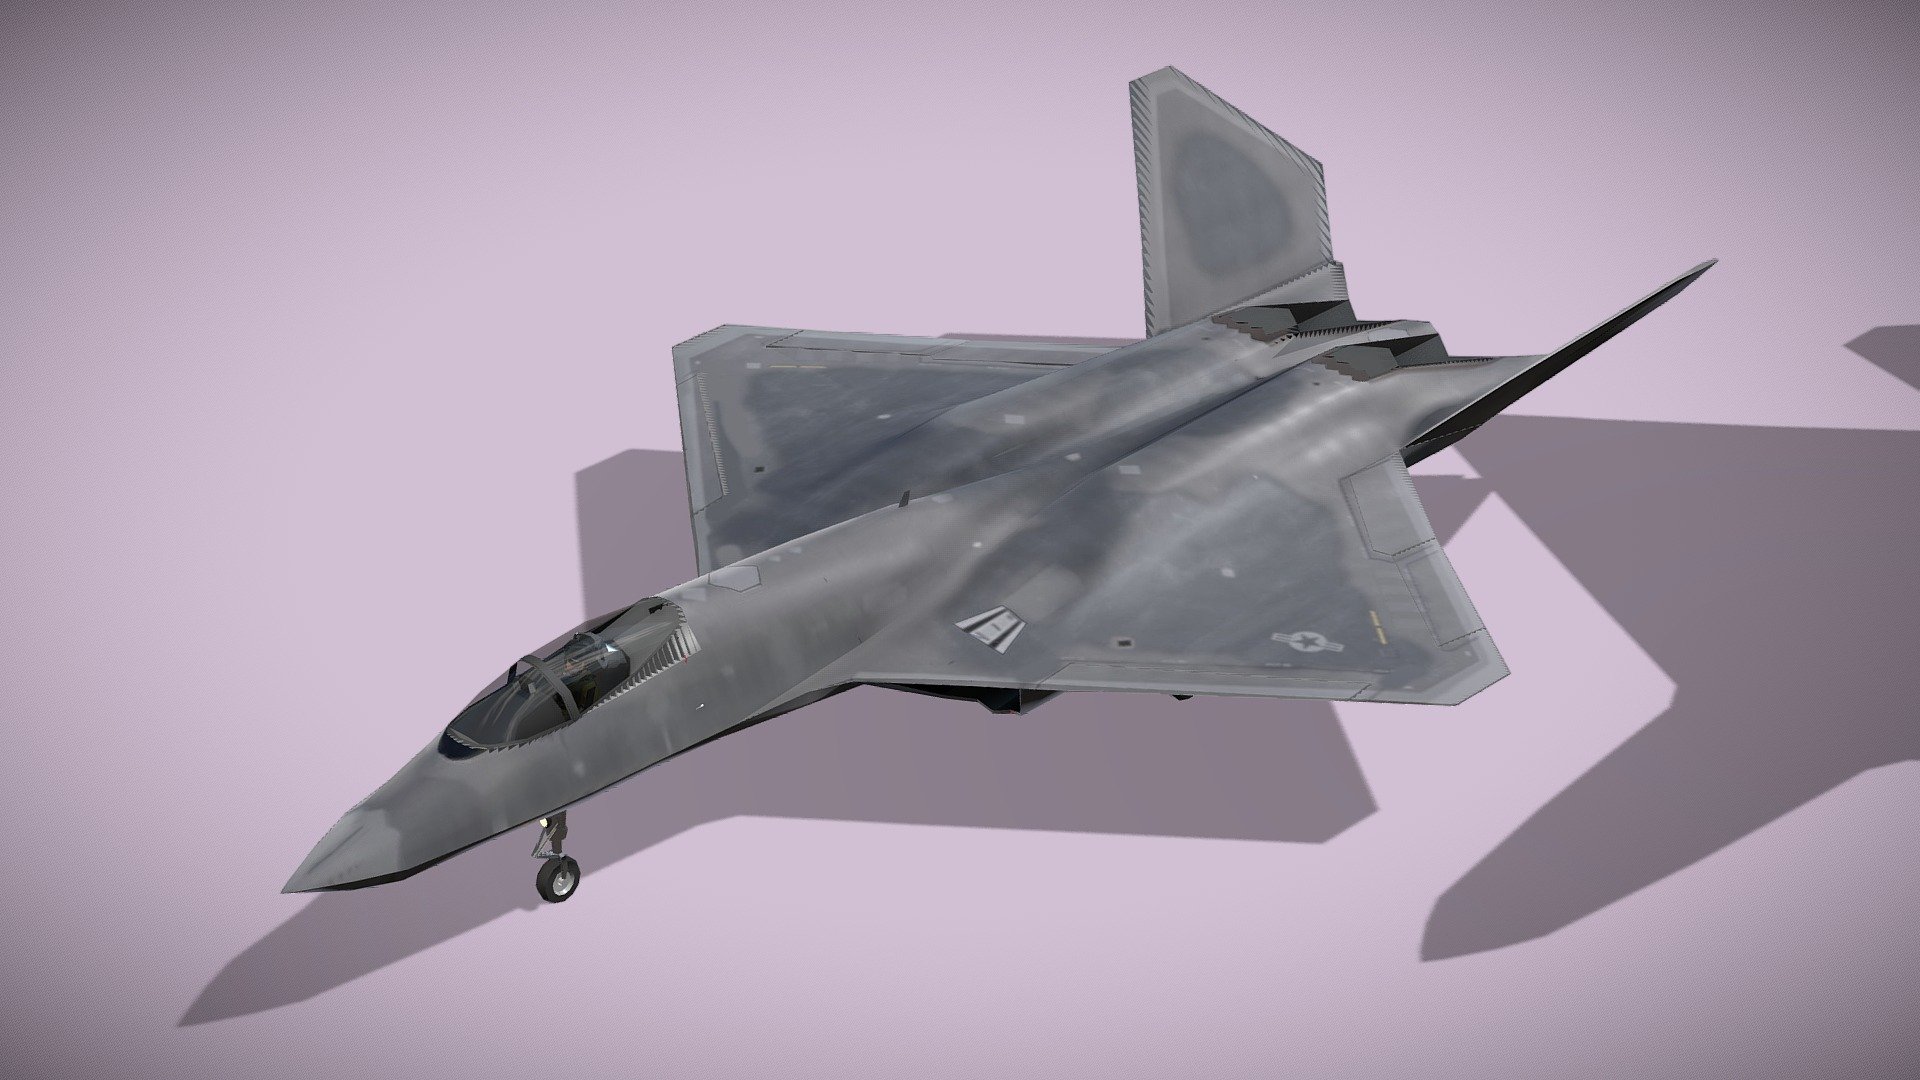 Northrop YF-23 Black Widow

Lowpoly model of american concept 5th gen fighter



The Northrop/McDonnell Douglas YF-23 is an American single-seat, twin-engine stealth fighter aircraft technology demonstrator designed for the USAF. The design was a finalist in the USAF's Advanced Tactical Fighter (ATF) competition, battling the Lockheed YF-22 for a production contract. Two YF-23 prototypes were built, nicknamed &ldquo;Black Widow II